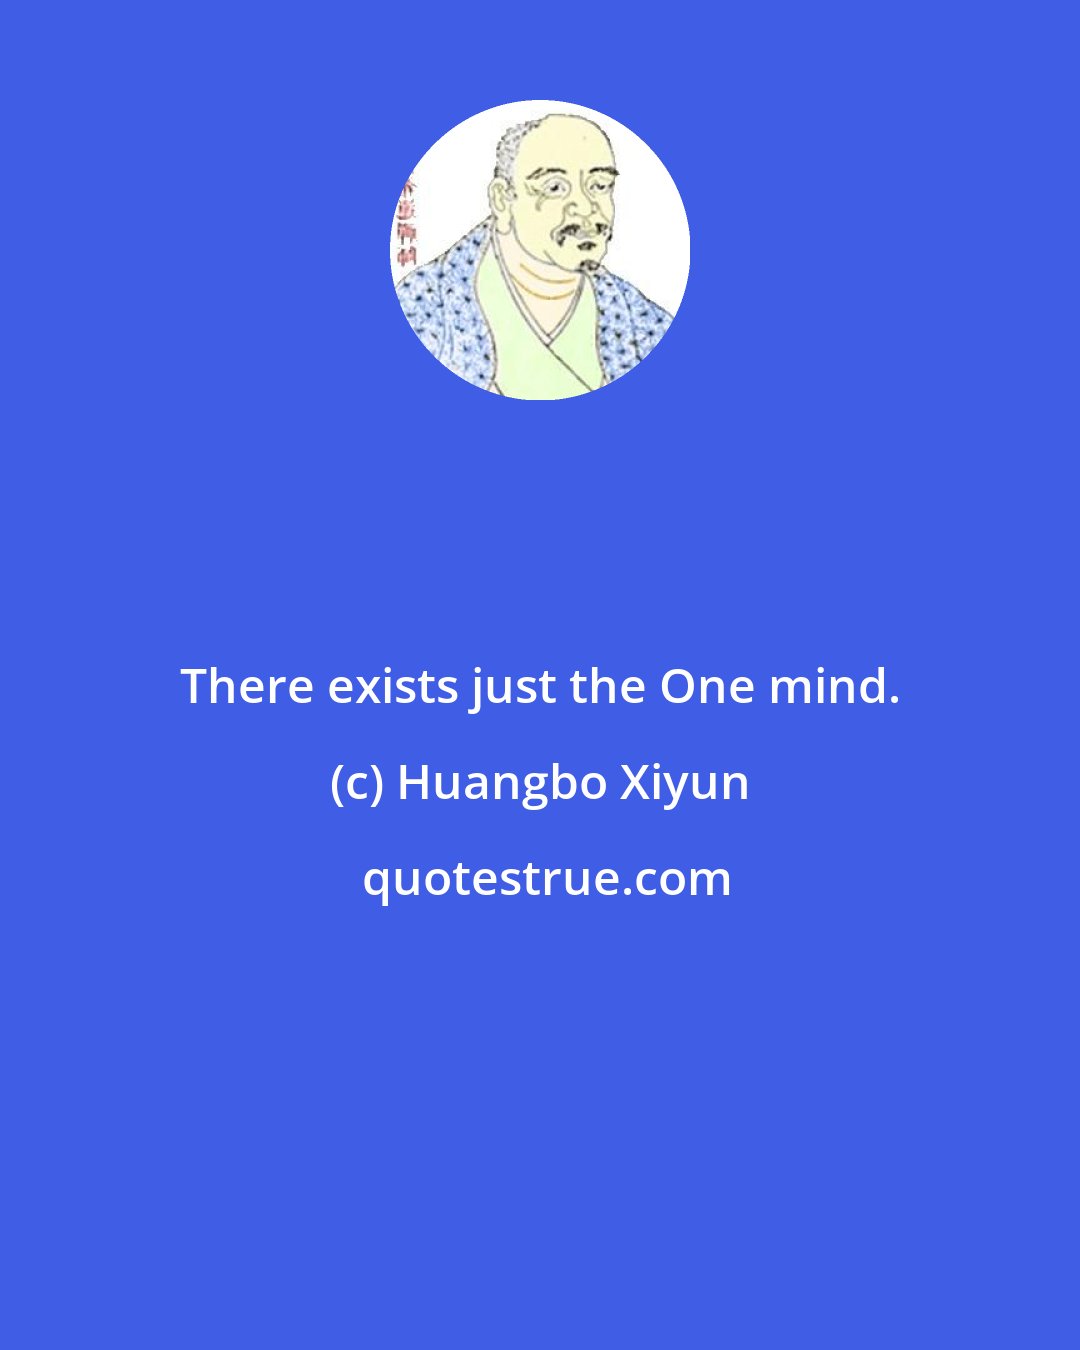 Huangbo Xiyun: There exists just the One mind.